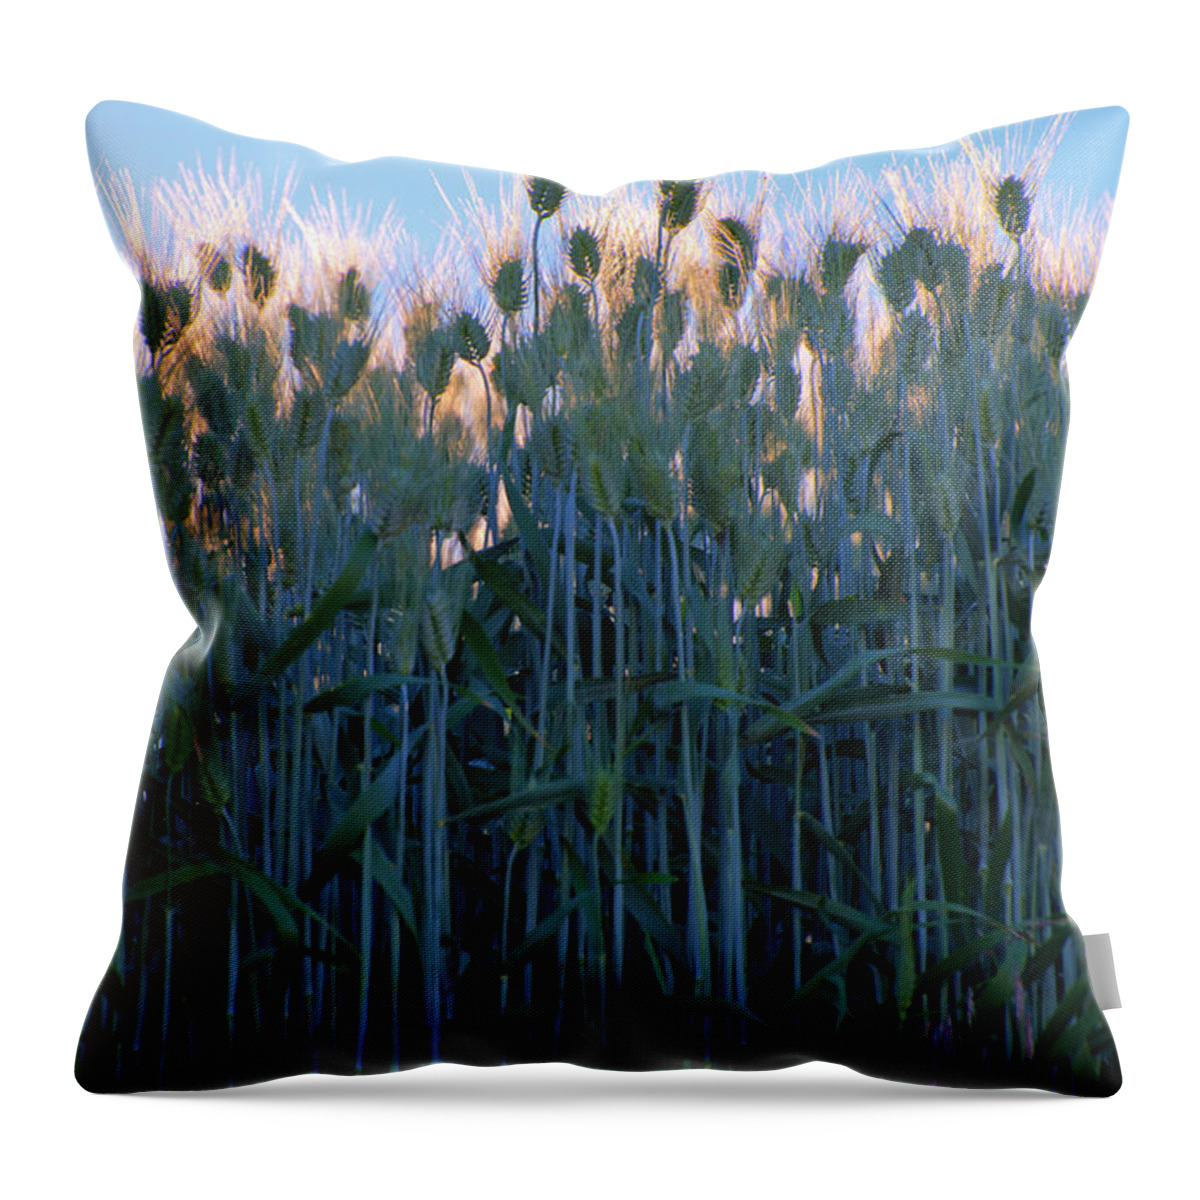 Outdoors Throw Pillow featuring the photograph July Crops II by Doug Davidson